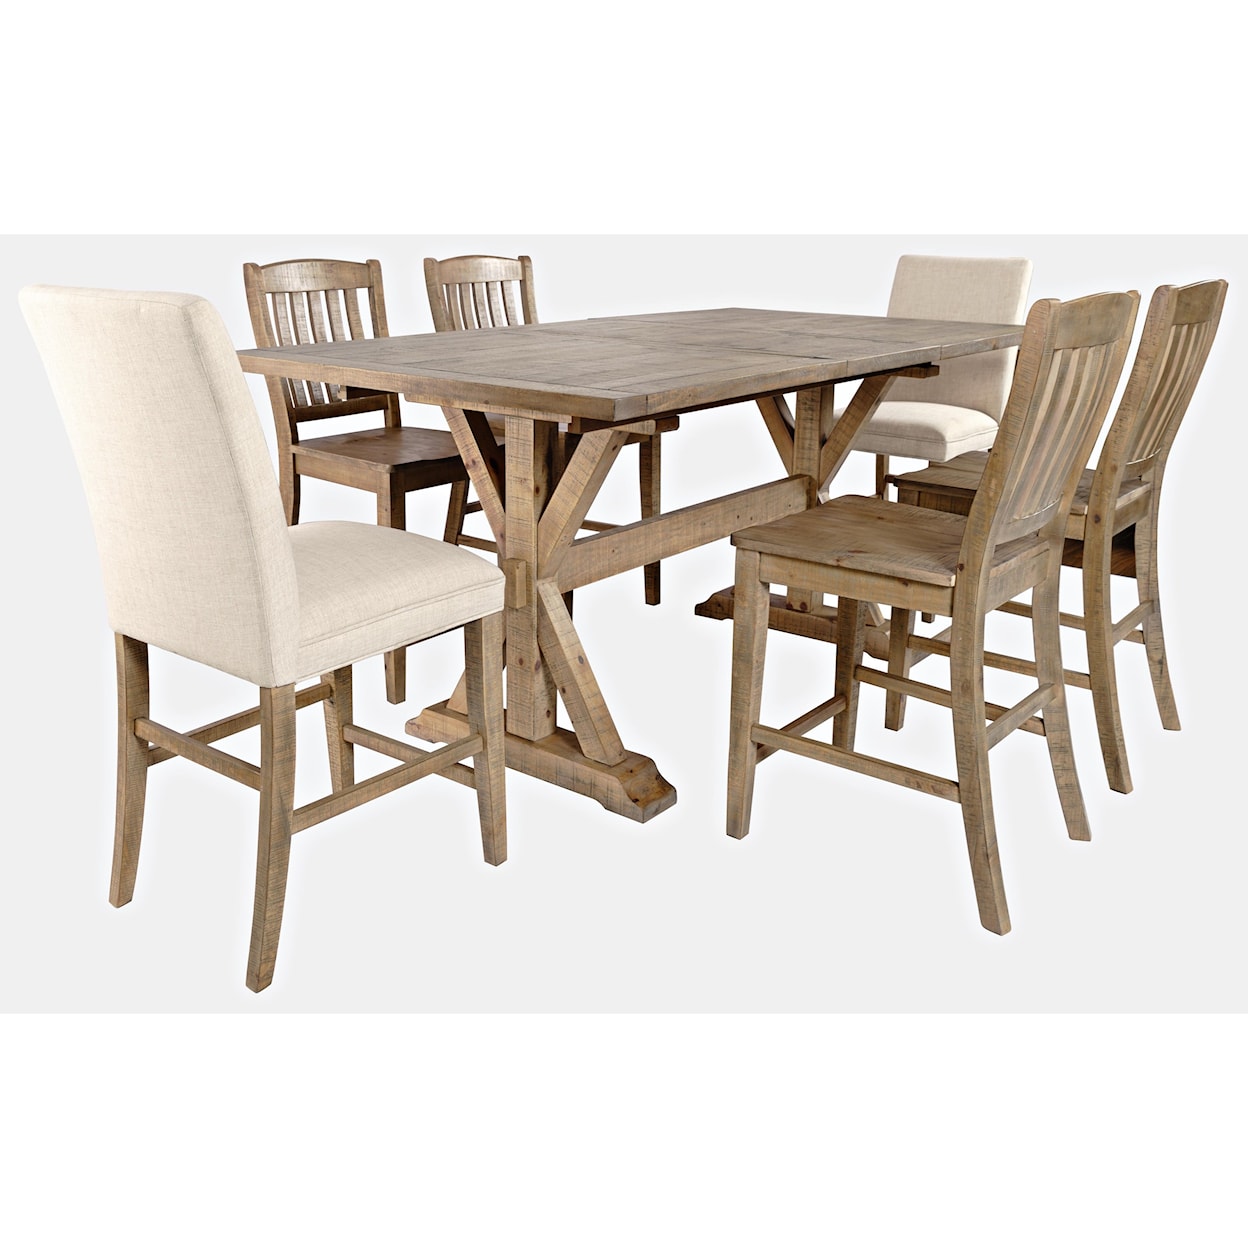 Jofran Carlyle Crossing 7pc Dining Room Group